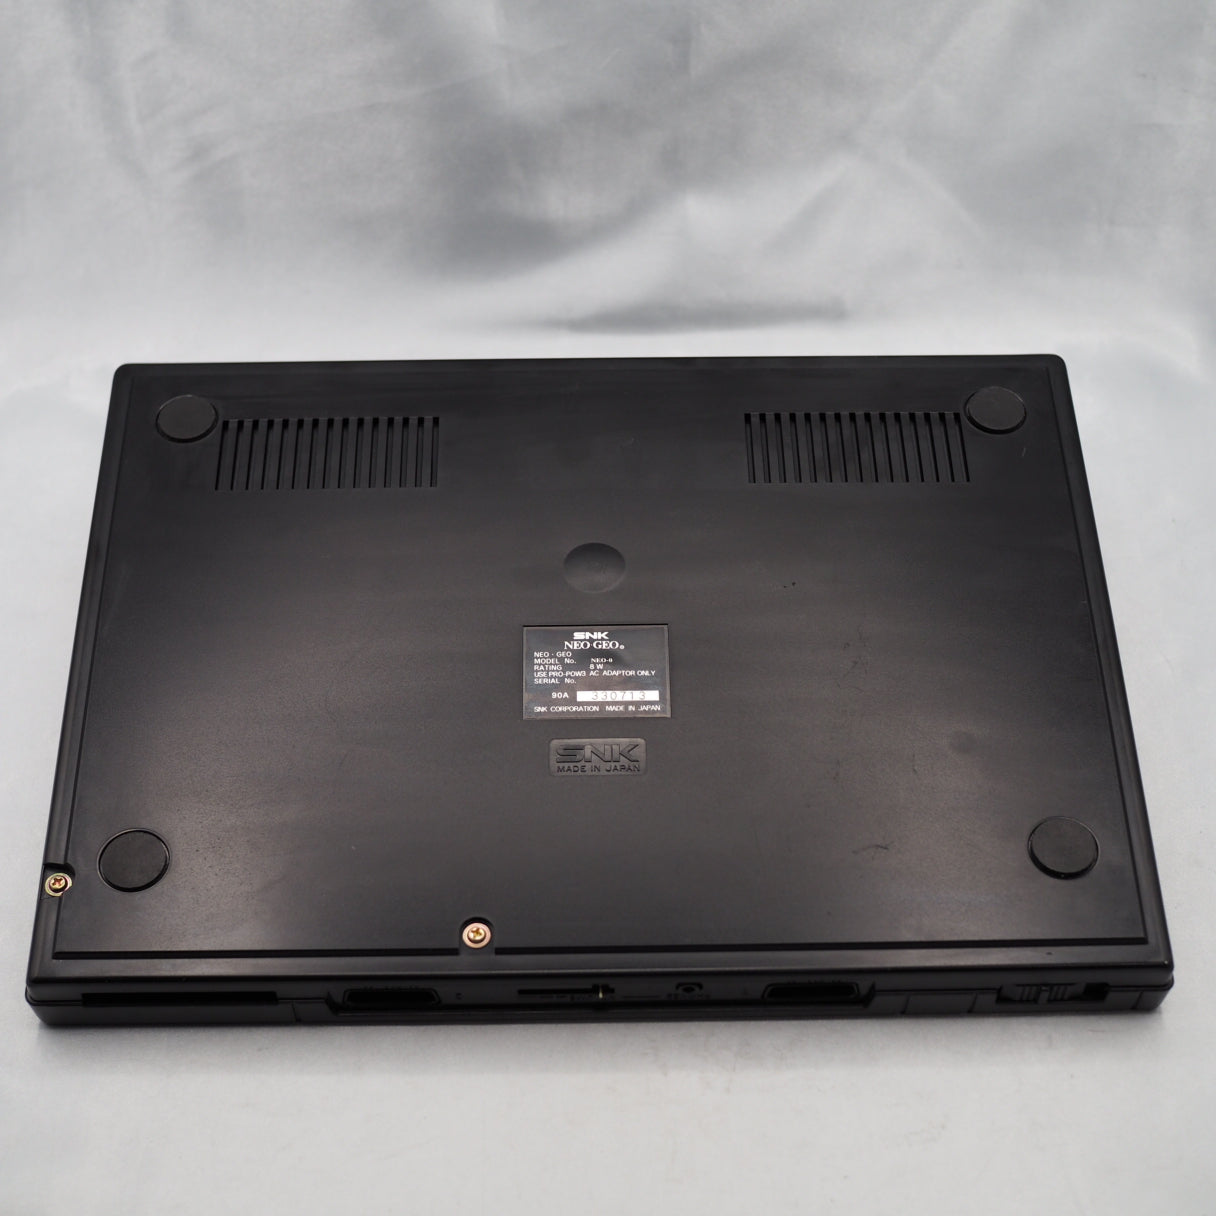 NEO GEO AES Console System & Controller UNIBIOS SNK